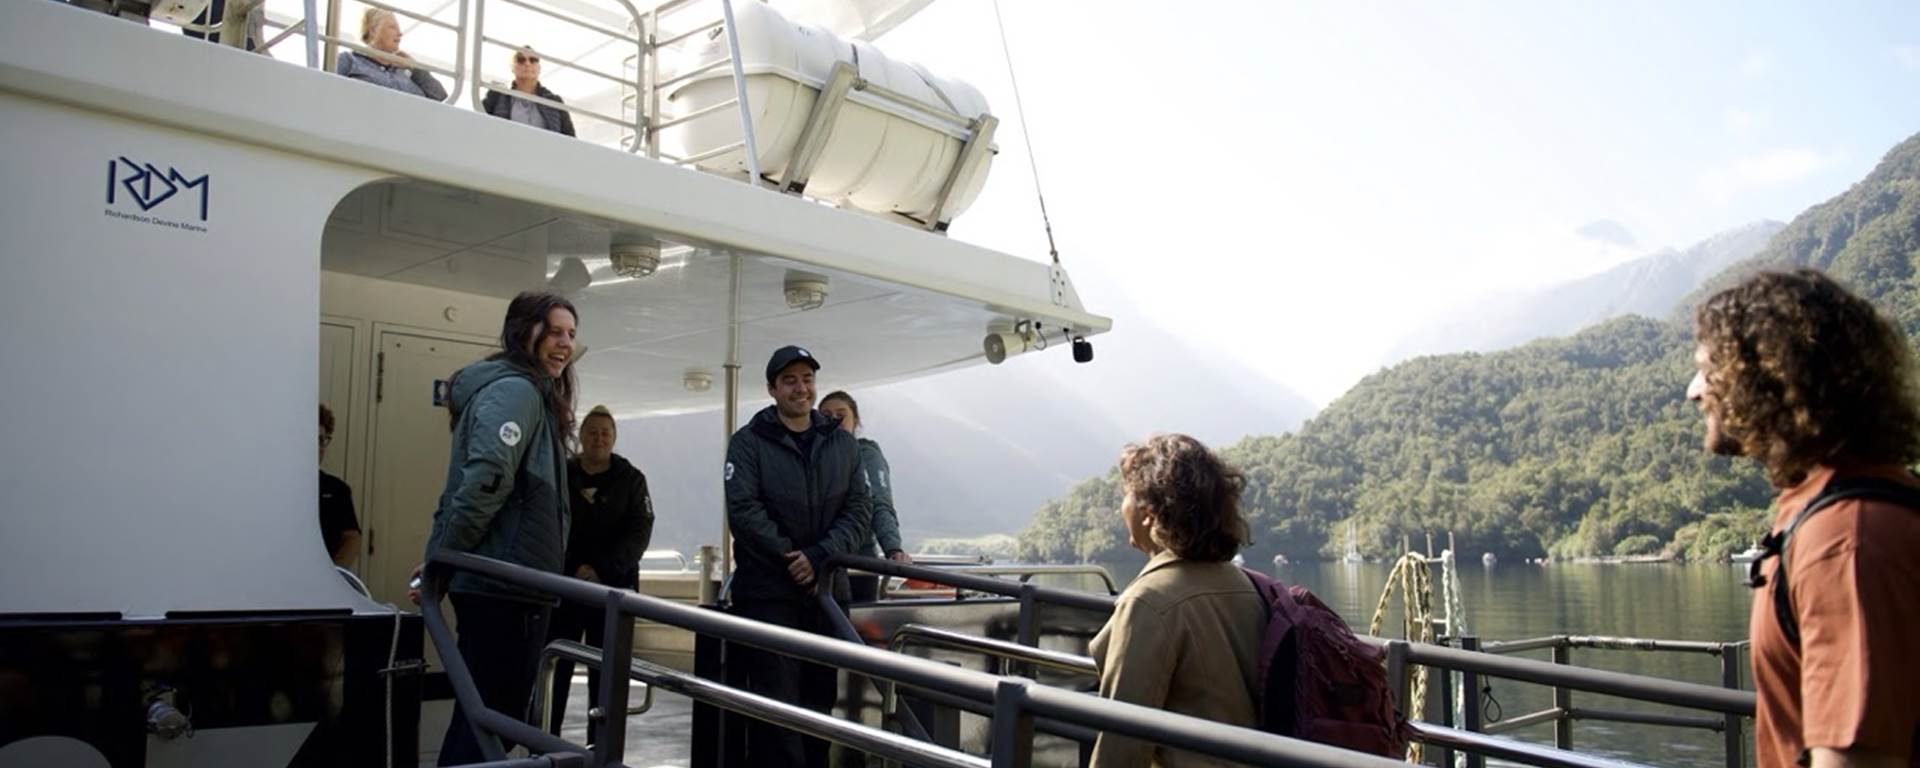 Guests are welcomed onboard a RealNZ vessel by the friendly crew